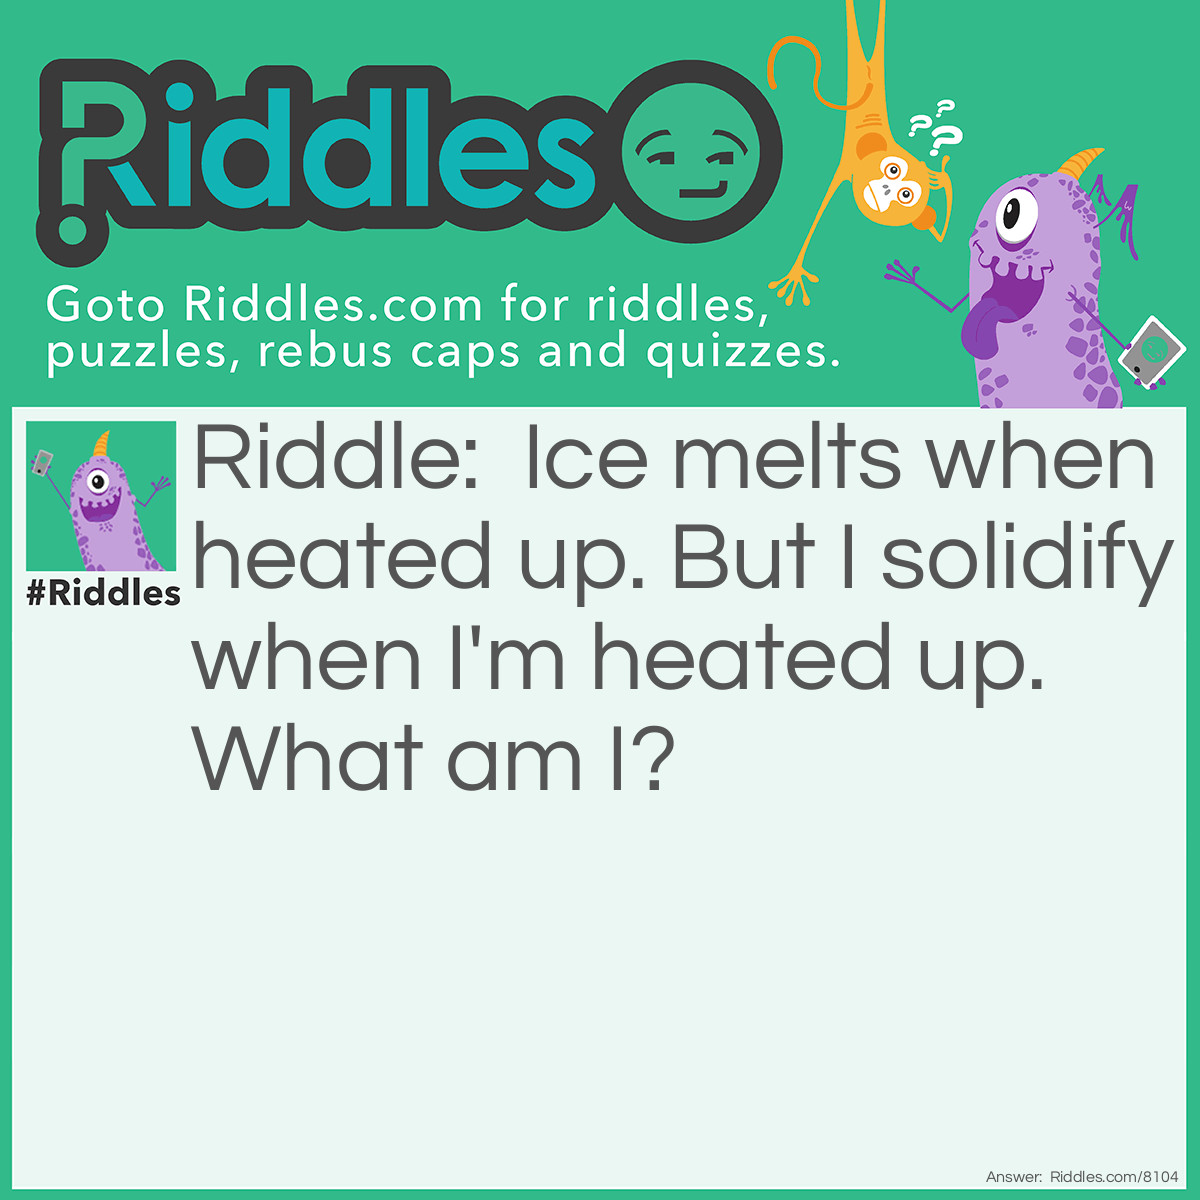 Riddle: Ice melts when heated up. But I solidify when I'm heated up. What am I? Answer: An egg.